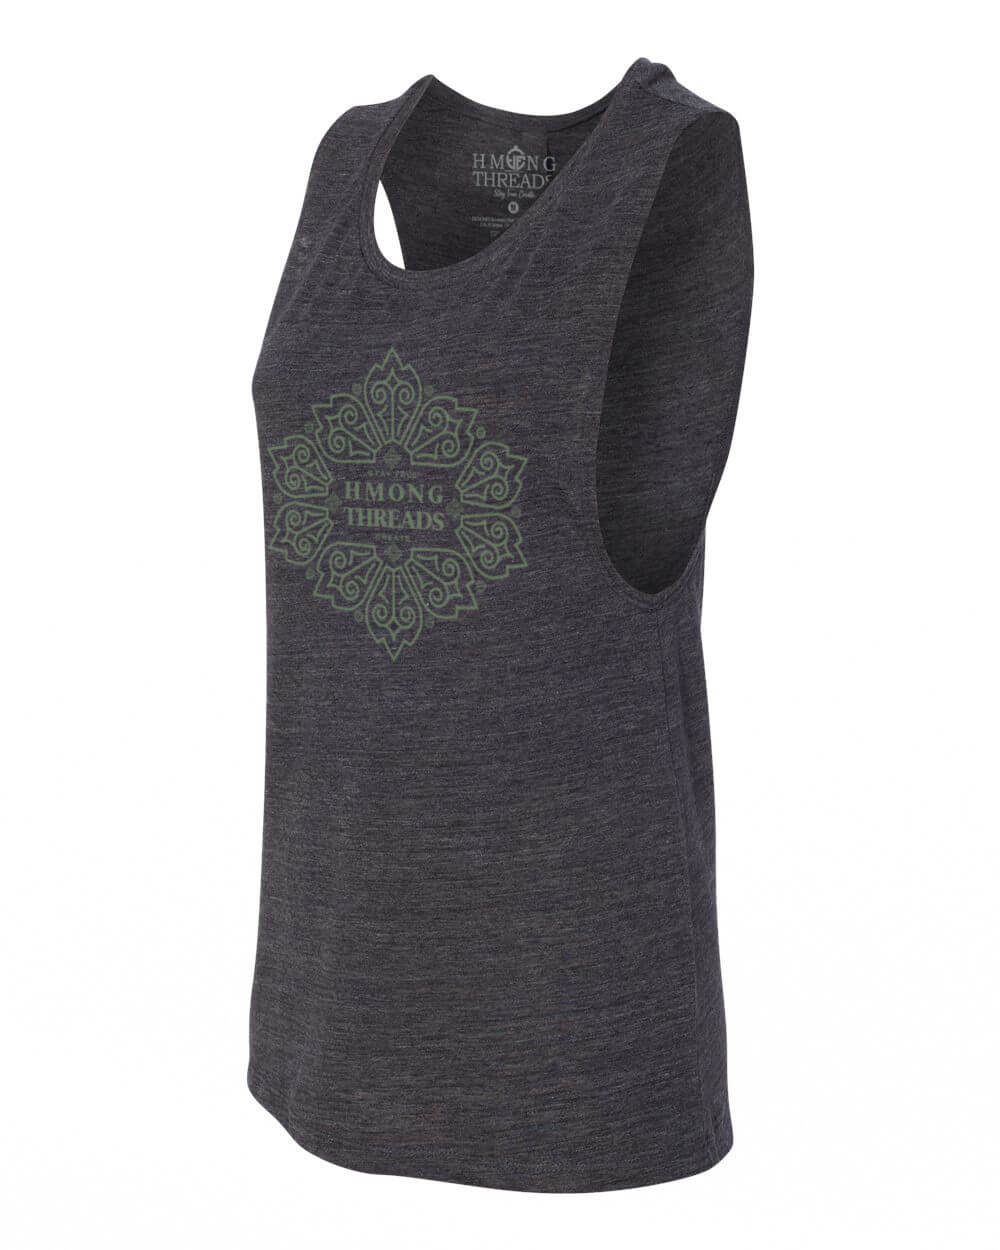 Stay True Nature Women's Scoop Muscle Tank - Charcoal Slub - HMONG THREADS